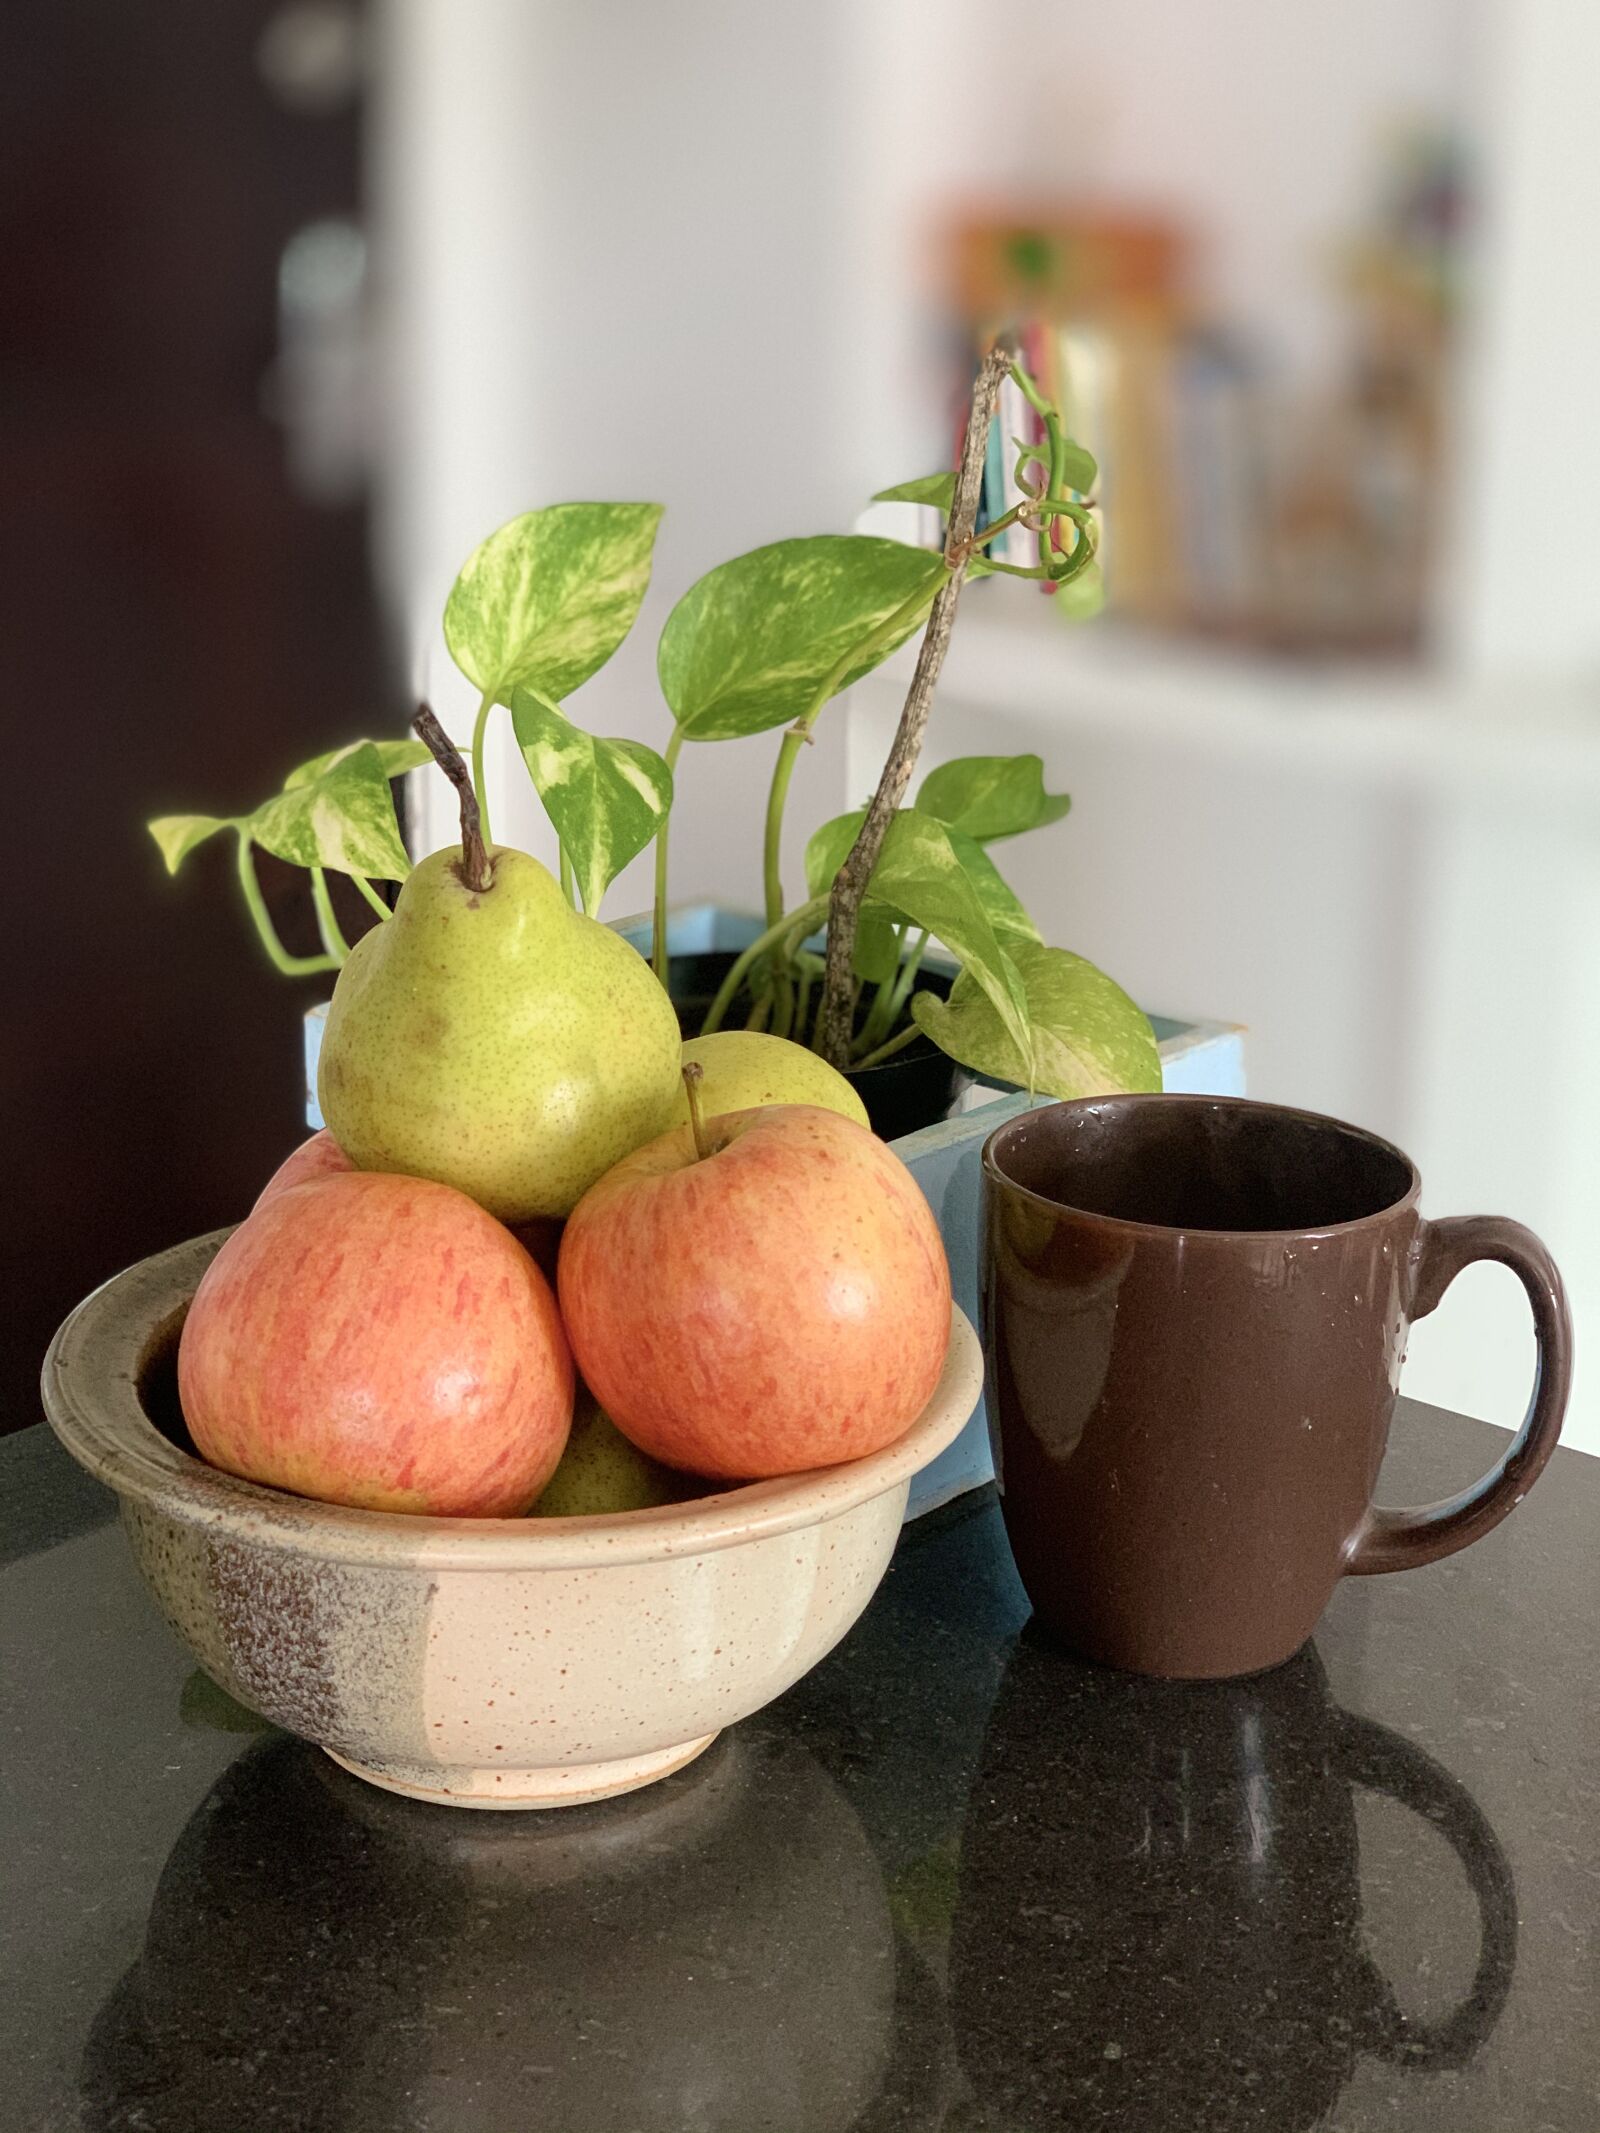 iPhone XS back dual camera 6mm f/2.4 sample photo. Apples, pears, pear photography